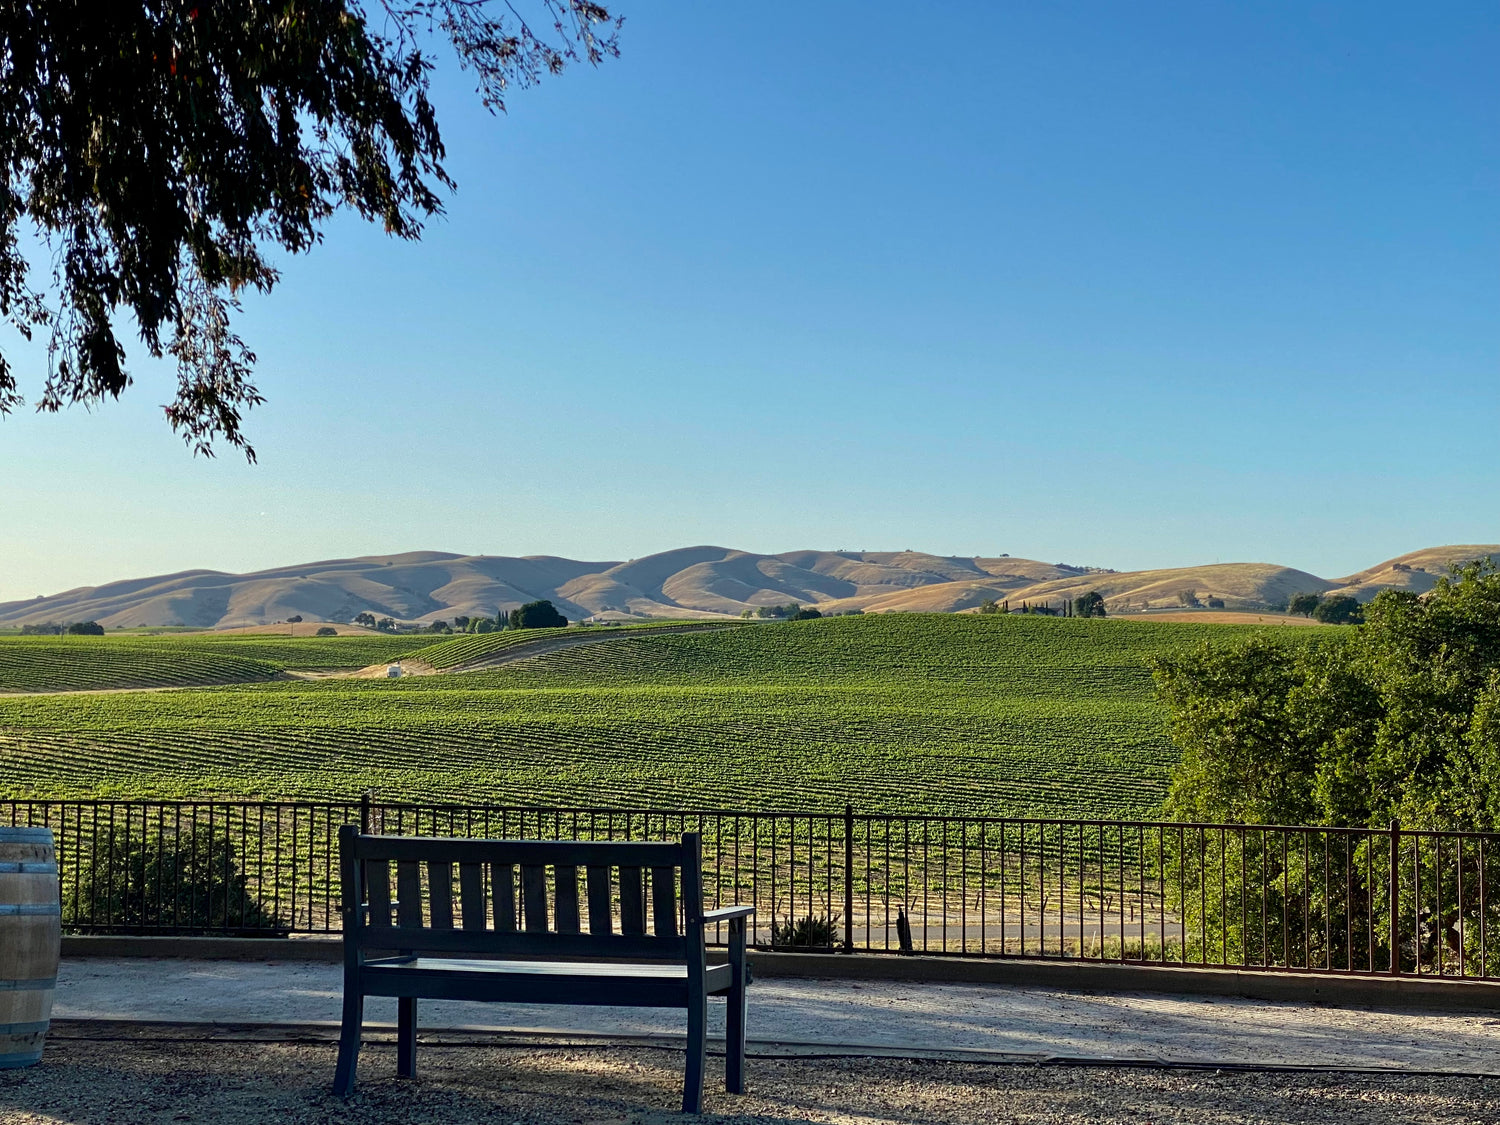 San Miguel wine country near Paso Robles